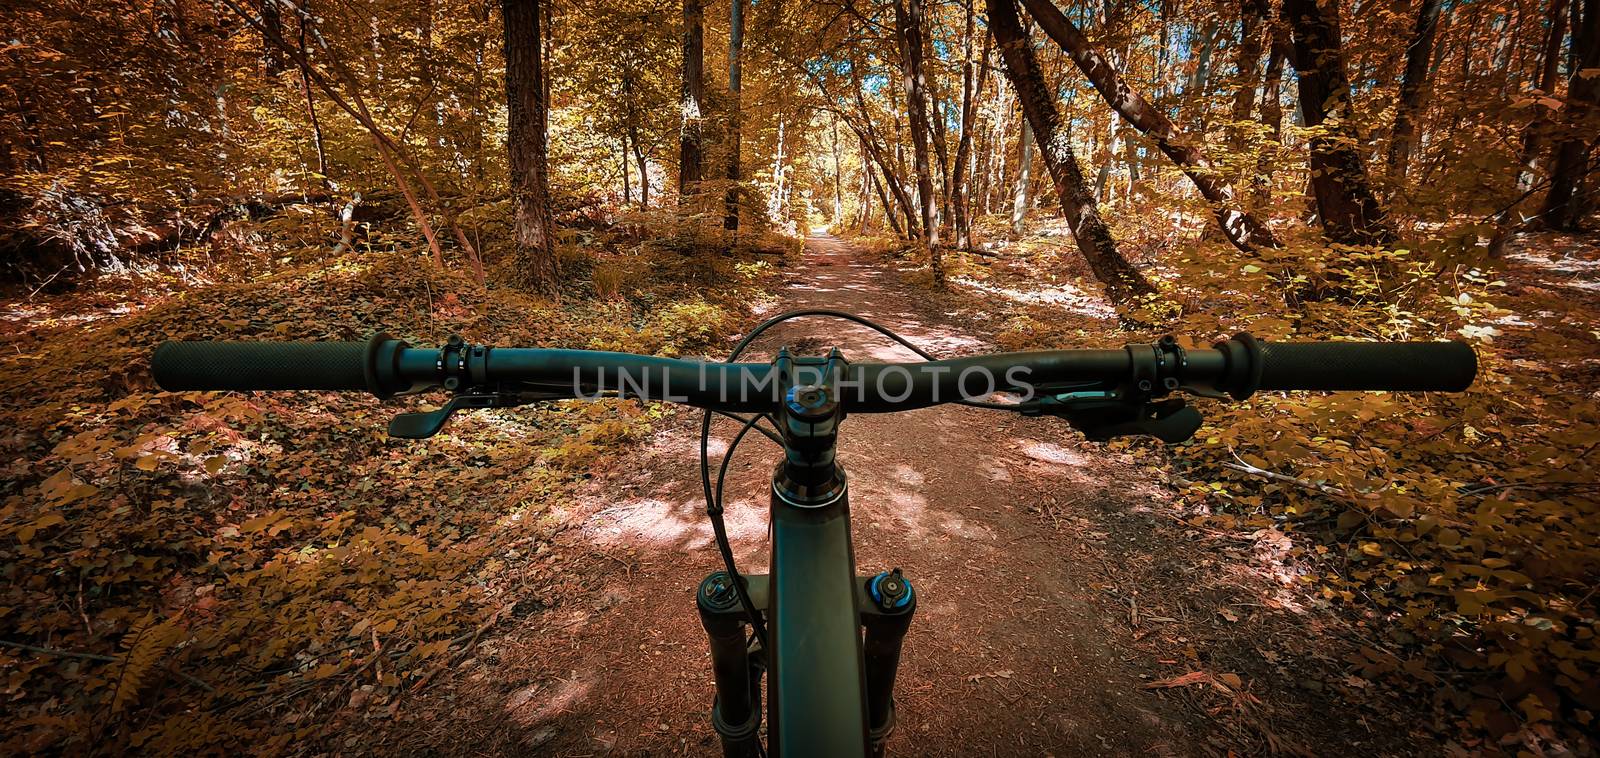 Autumn mountain bike trail with handlebars in the foreground by Mendelex